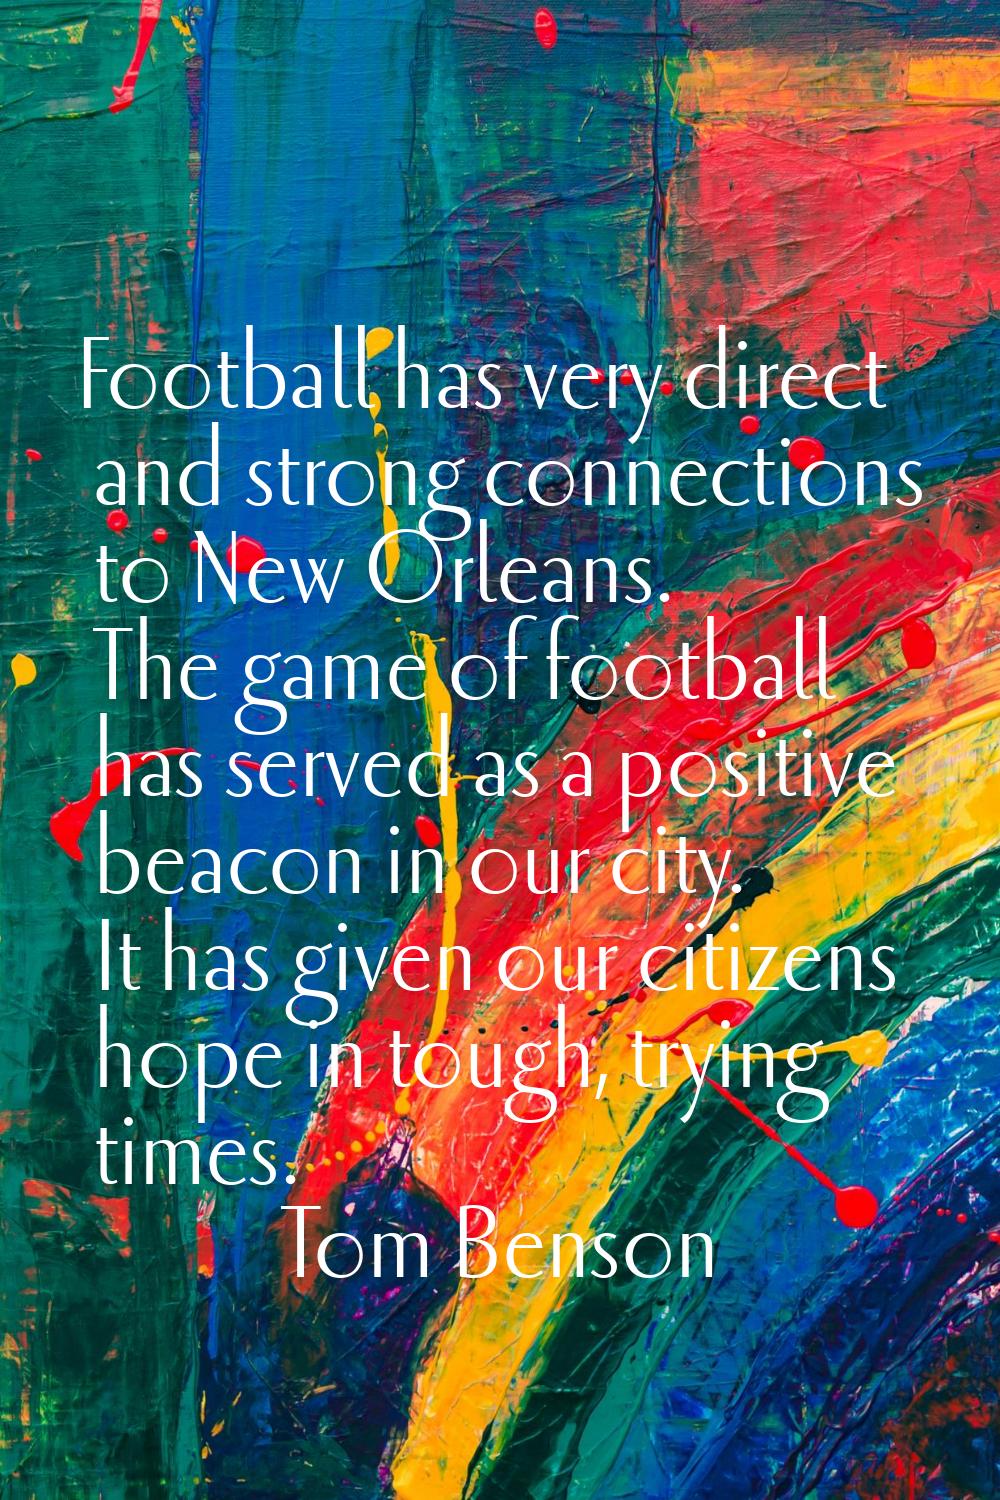 Football has very direct and strong connections to New Orleans. The game of football has served as 